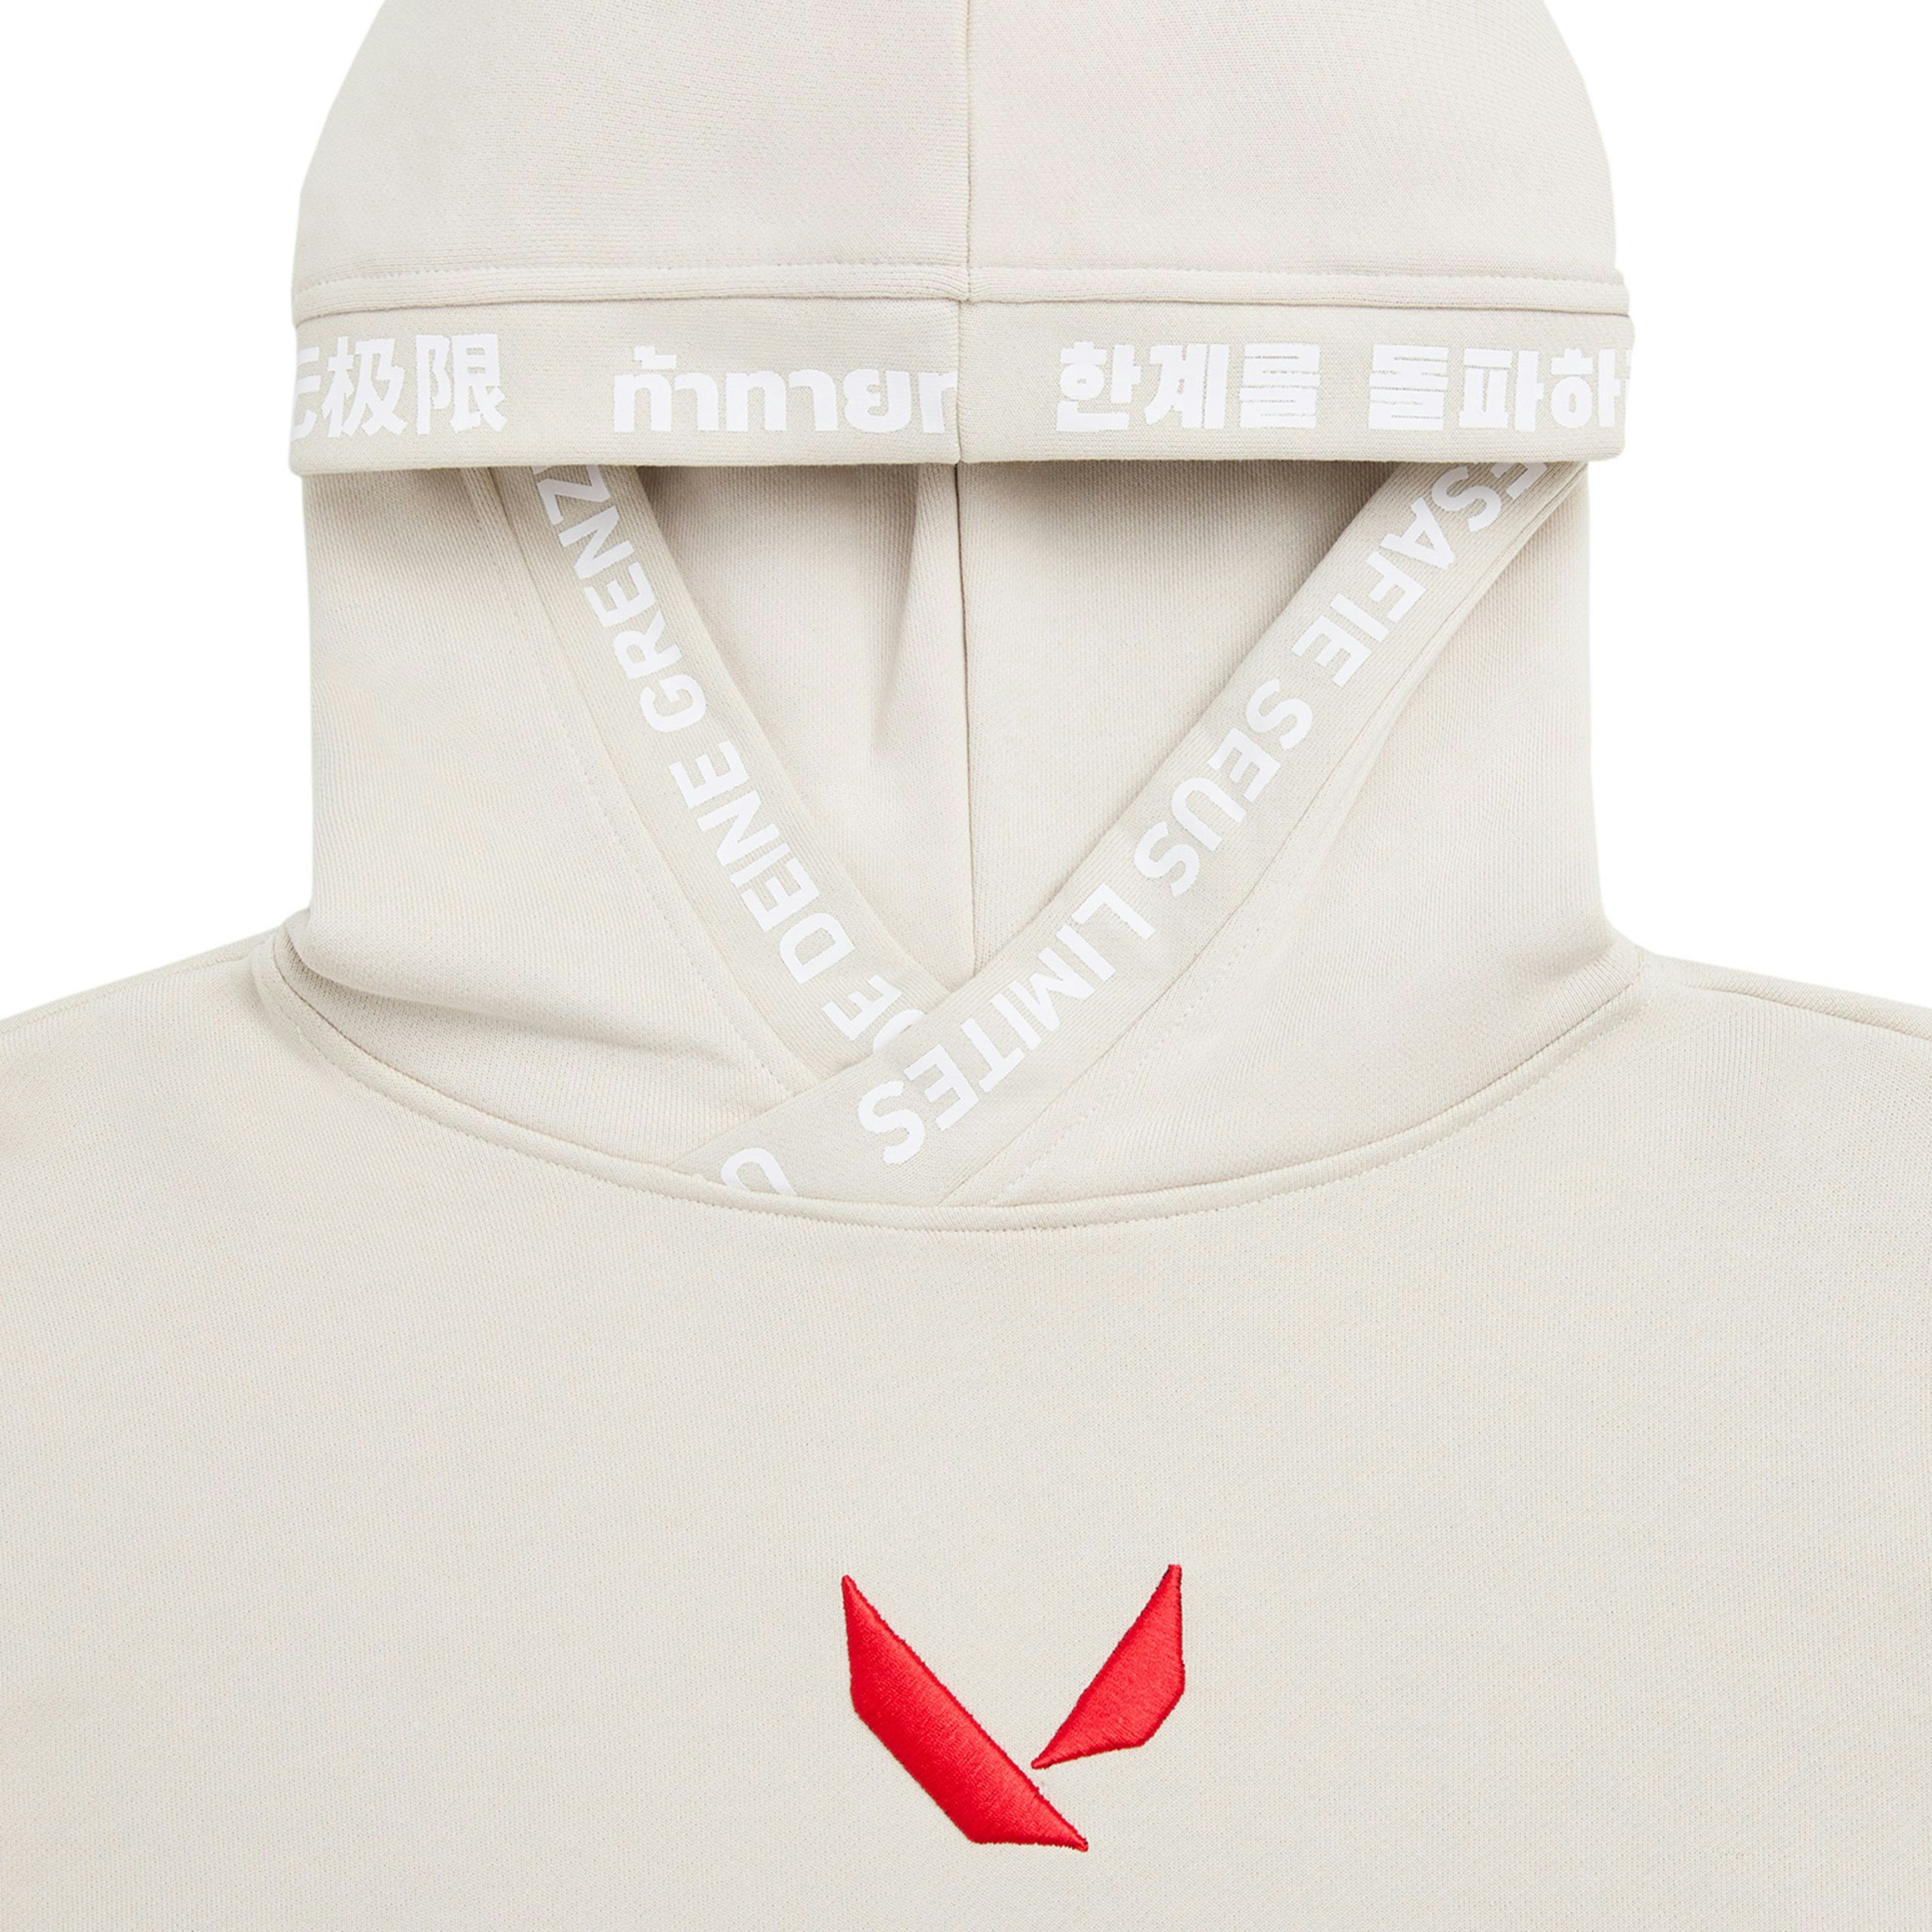 VALORANT "Defy the Limits" Hoodie